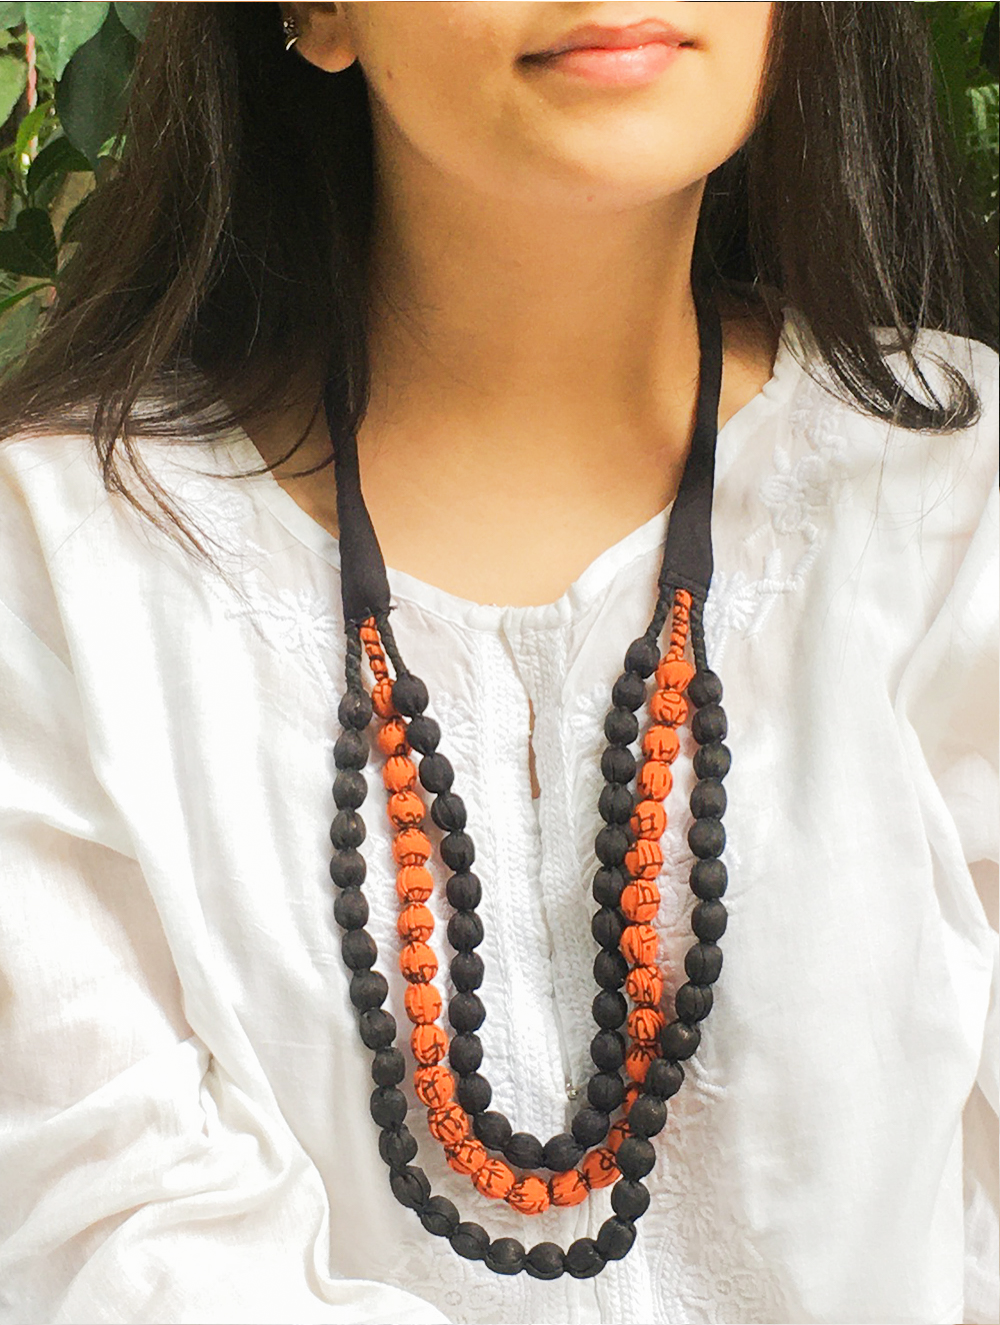 Melpo - Stunning warm toffee orange necklace made of chunky vintage am –  grecianboho